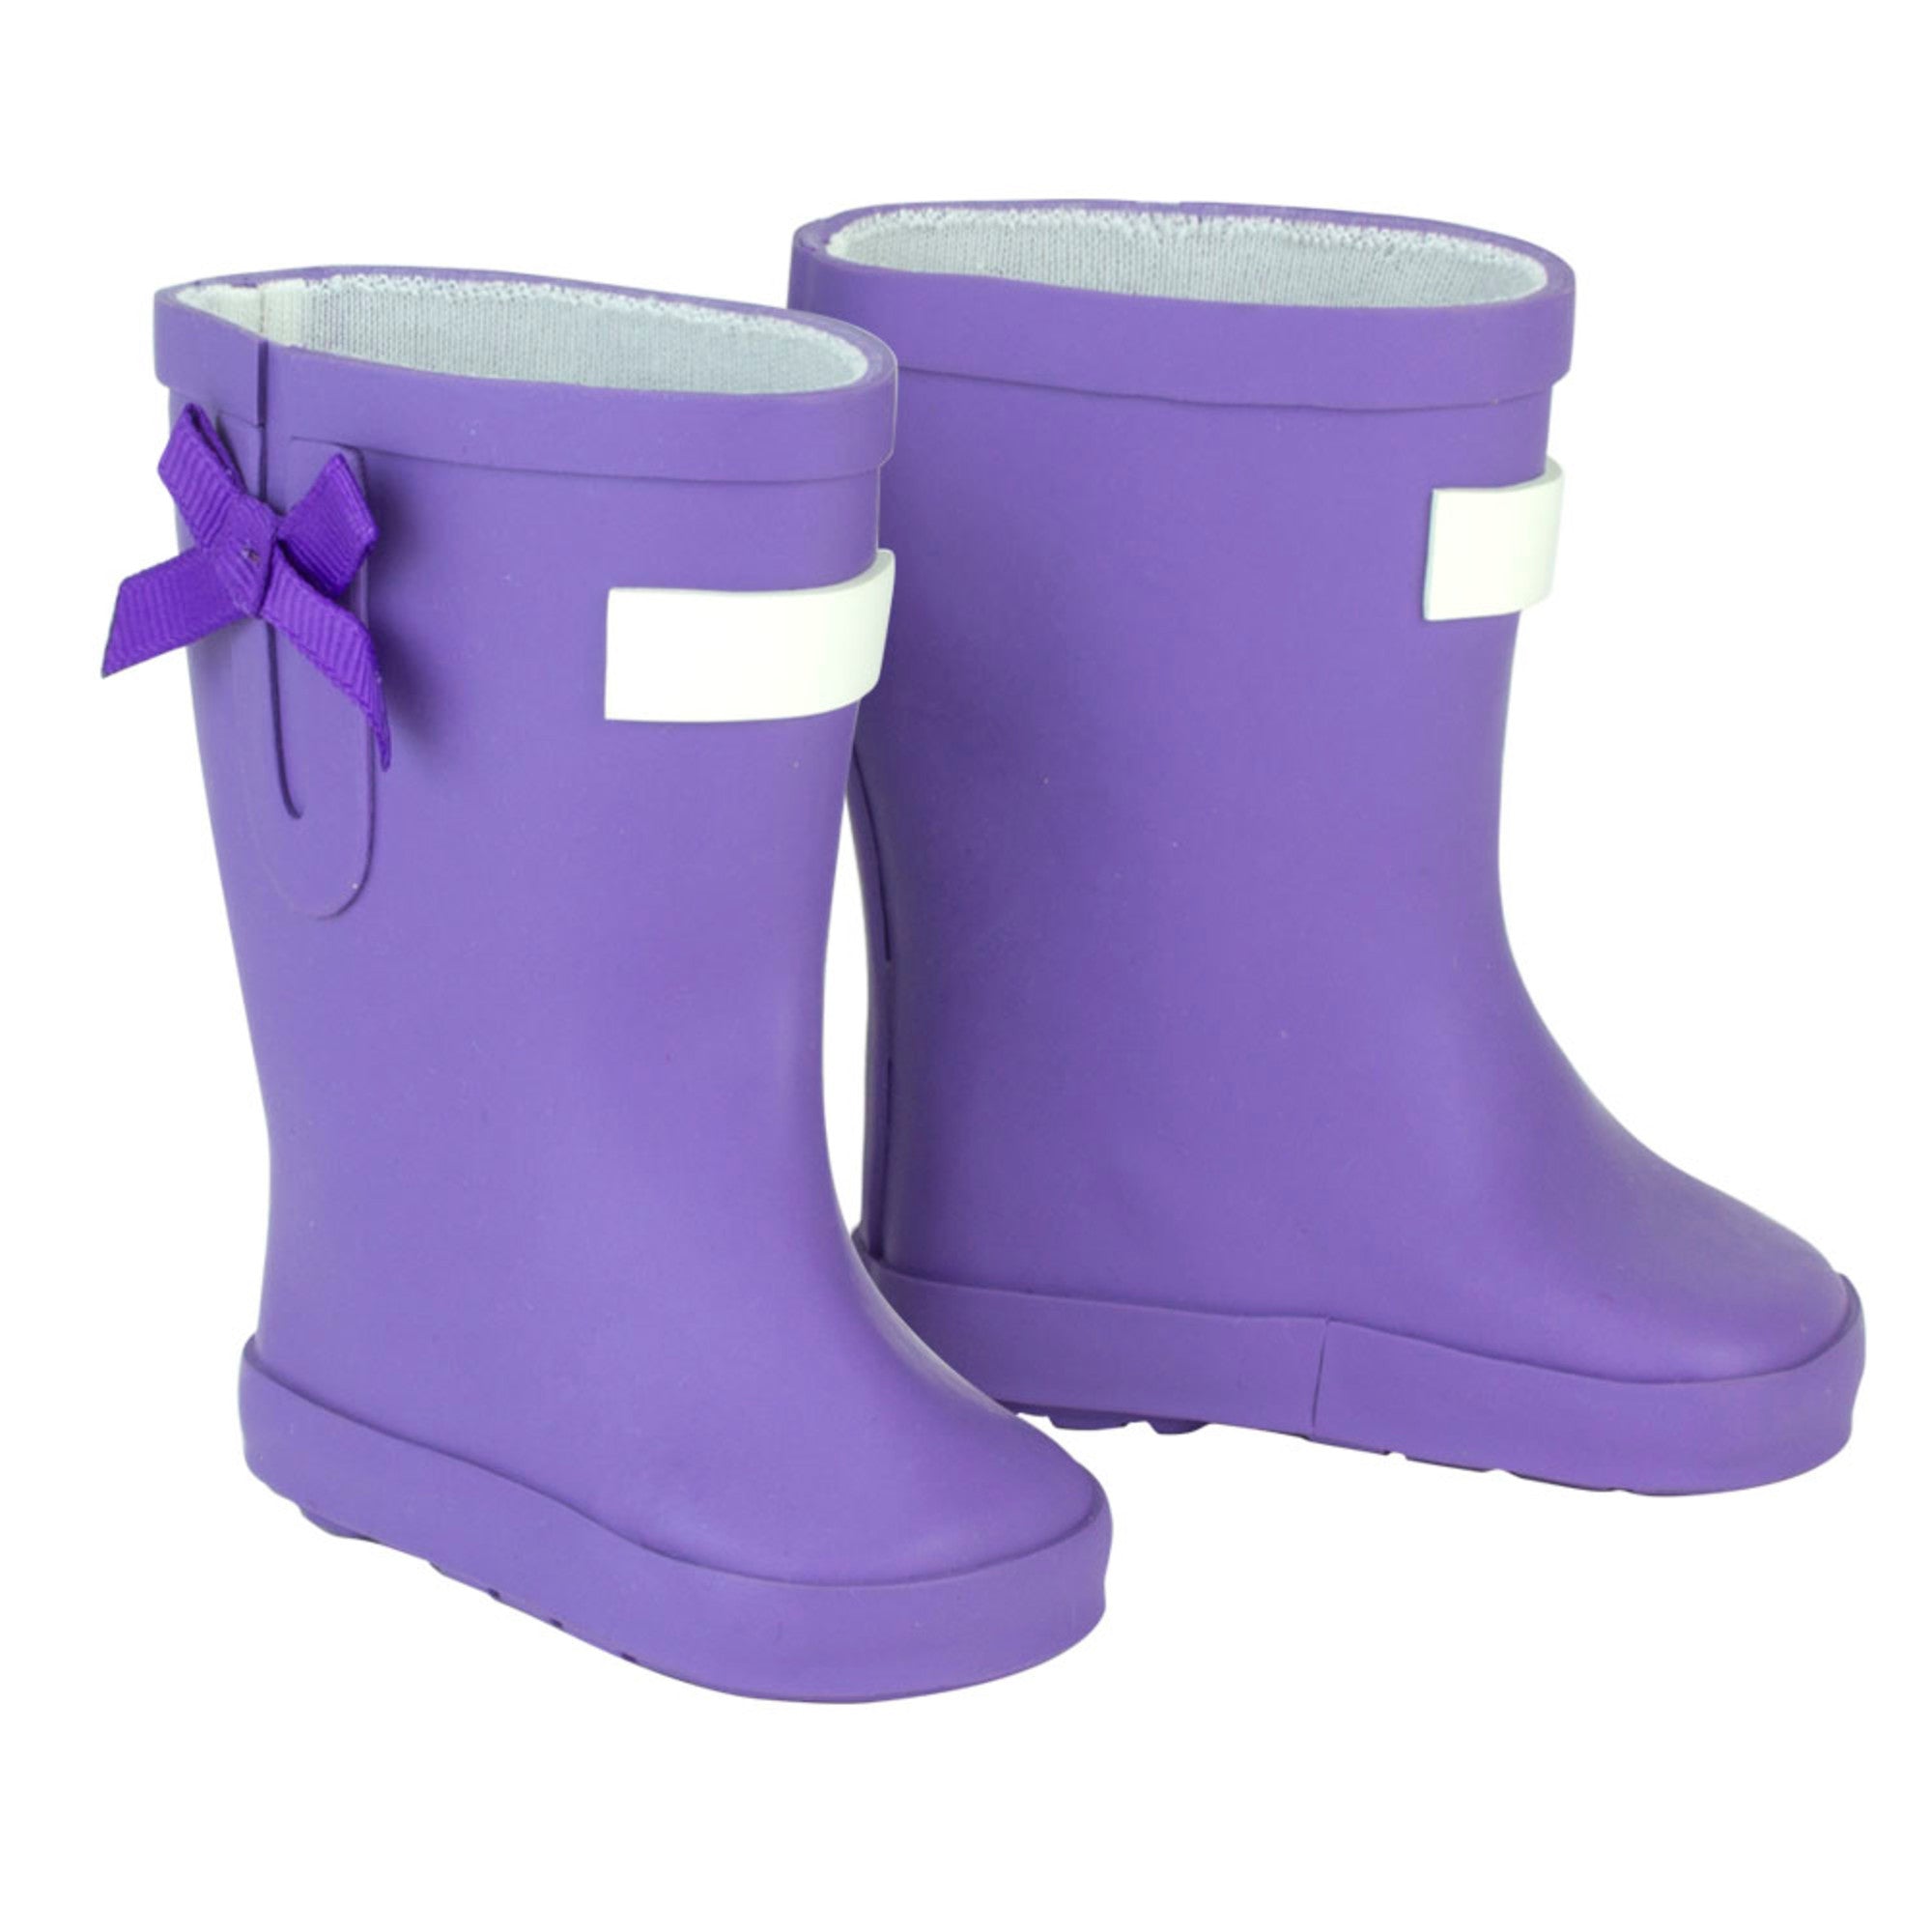 Sophia’s Super-Cute Solid-Colored Mix & Match Spring Molded Wellie Rain Boots with Bow Accents for 18” Dolls, Purple